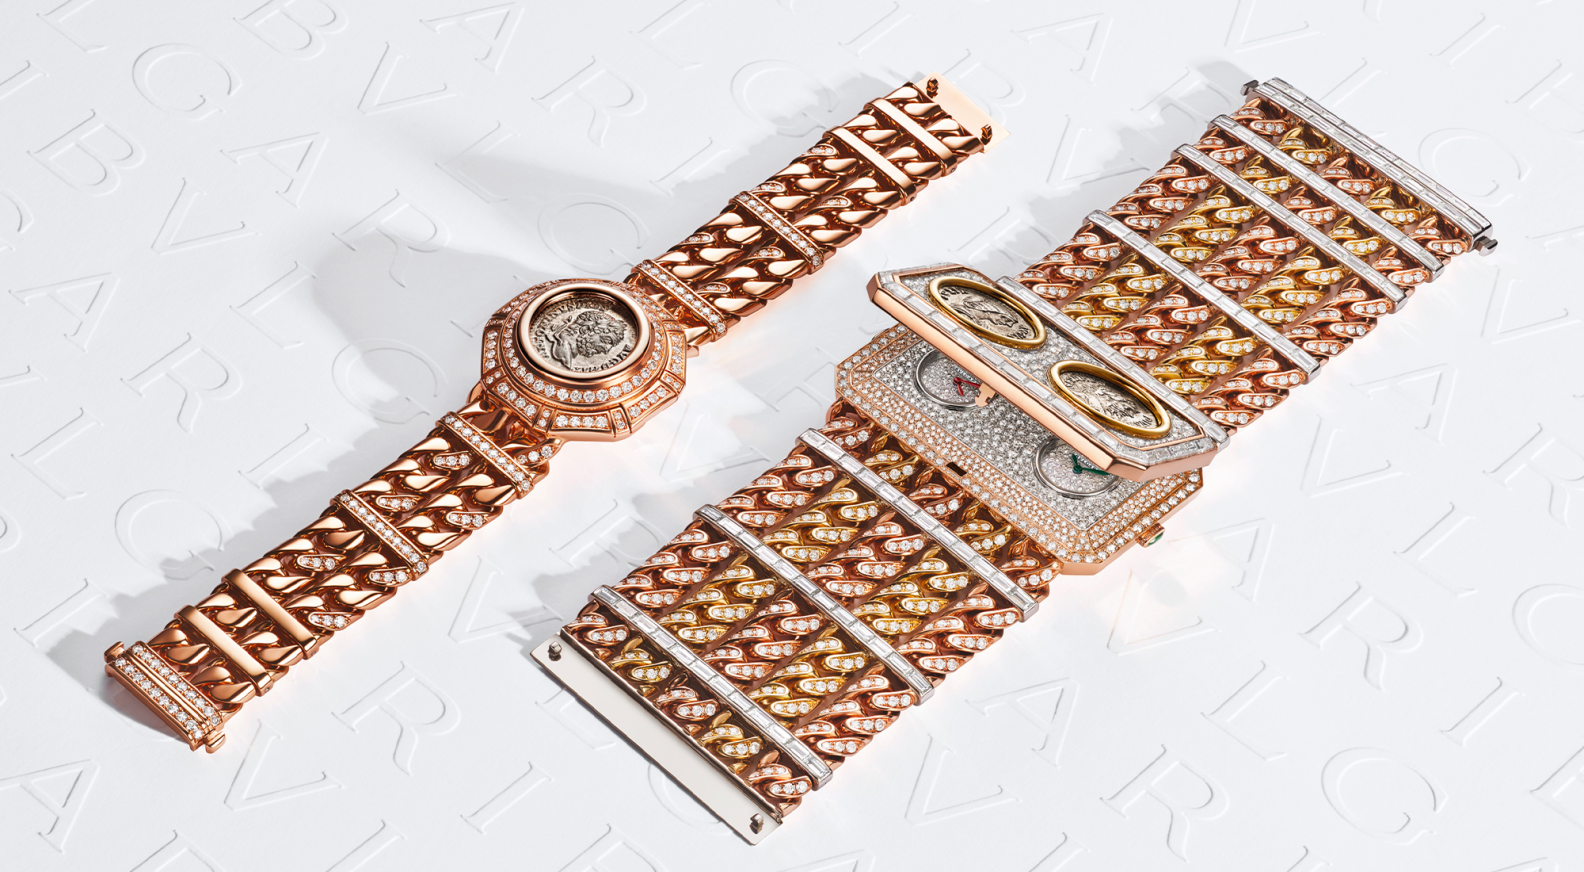 LVMH Watches & Jewelry